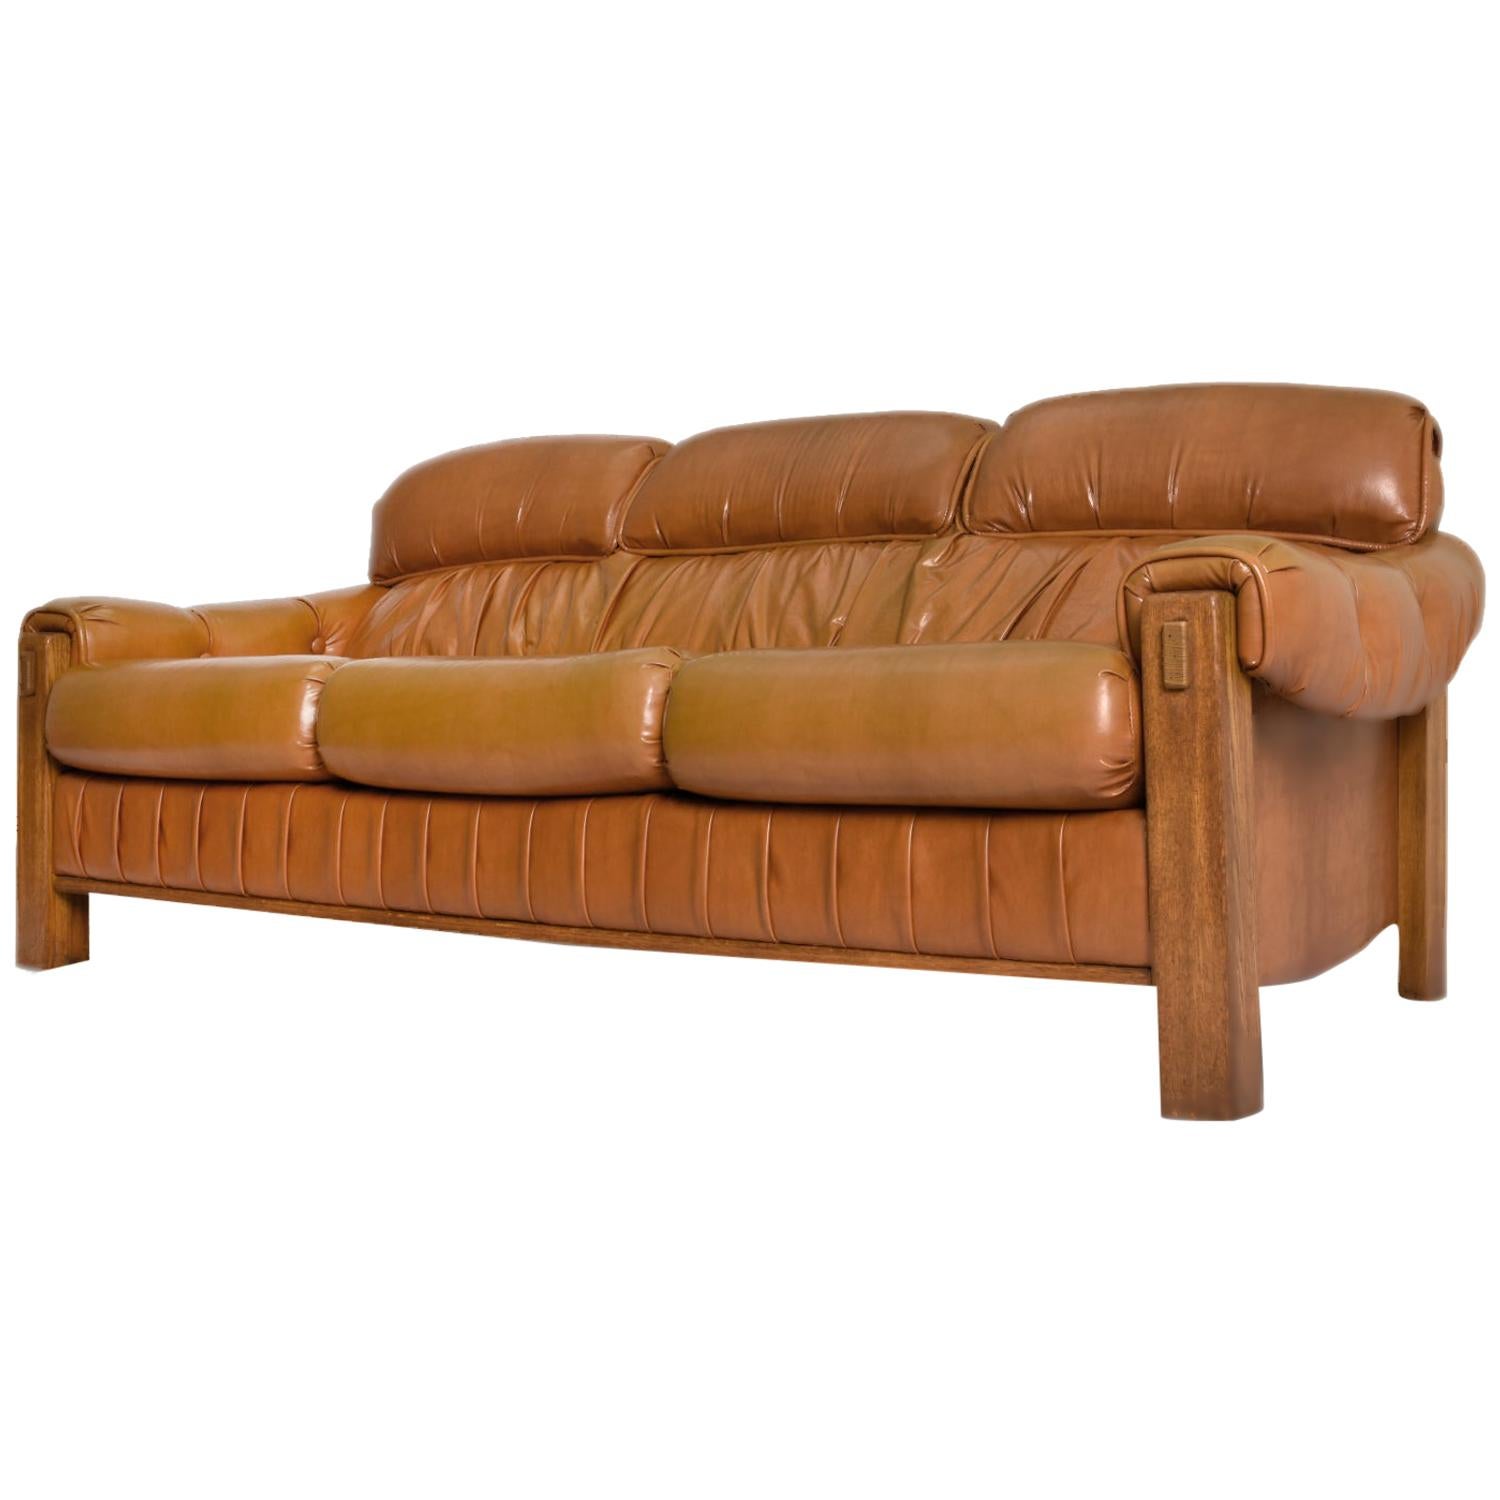 Percival Lafer Style Vintage Generously Stuffed Butterscotch and Oak Sofa Couch